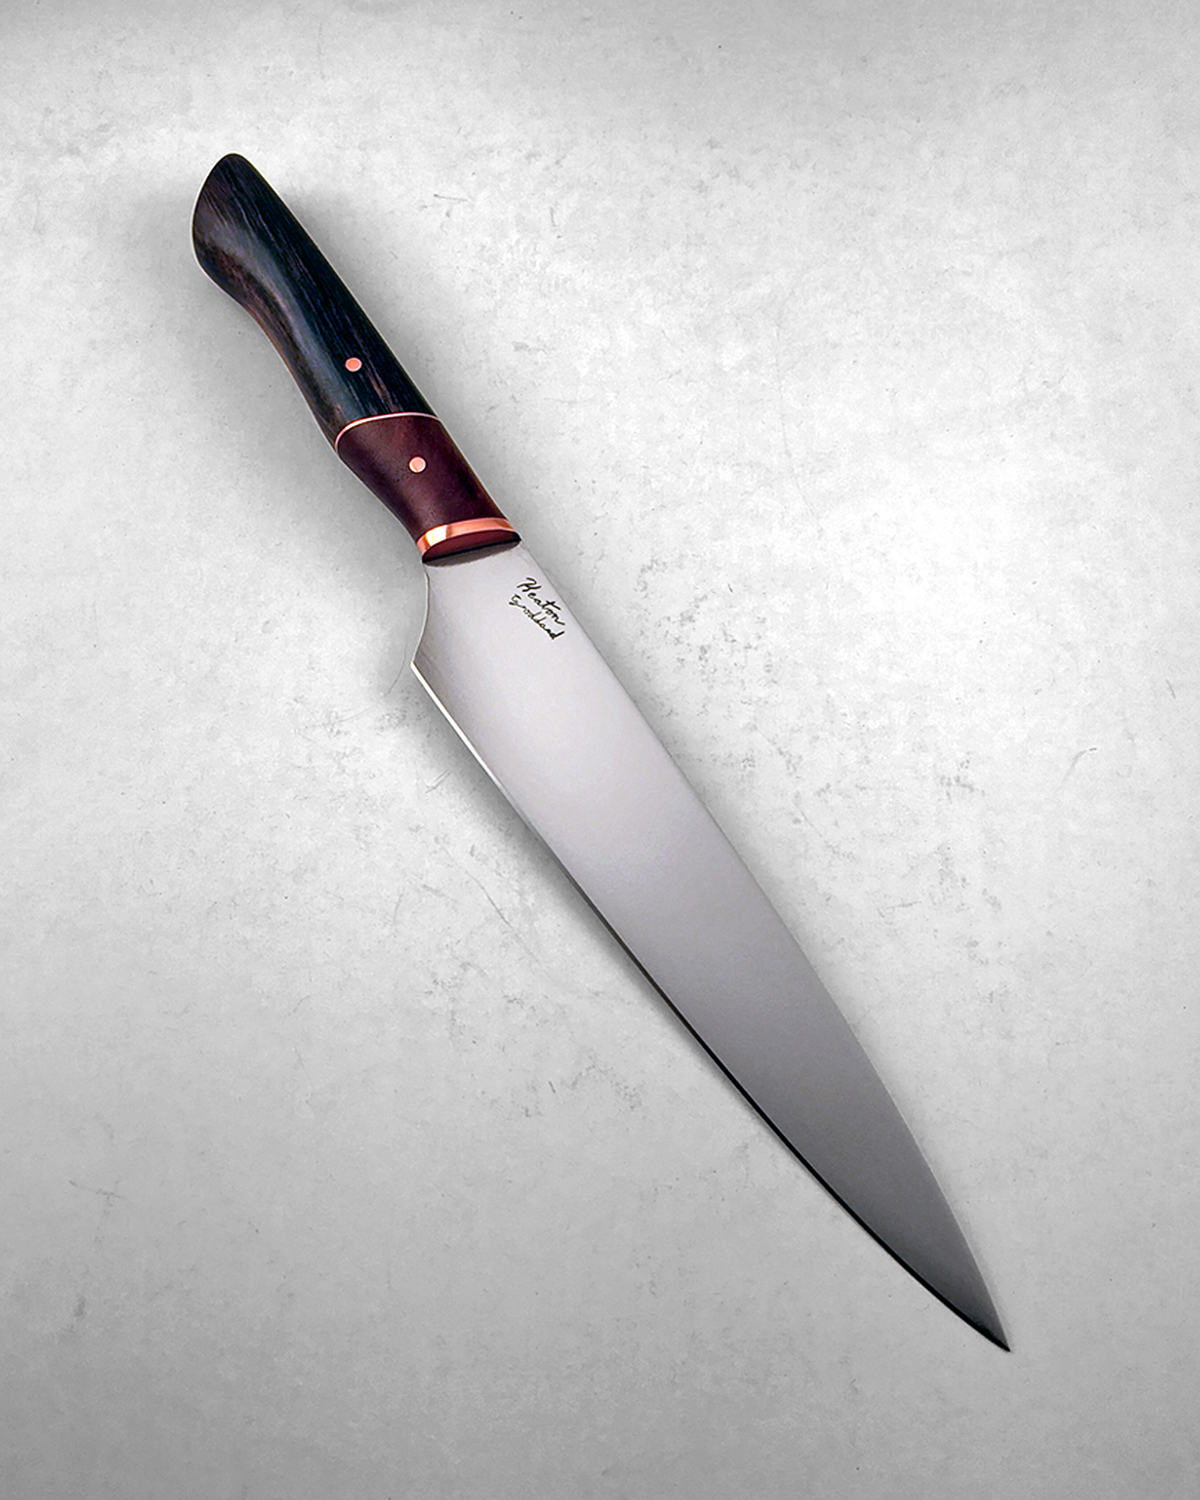 Forge to Table 6 Utility Petty Knife